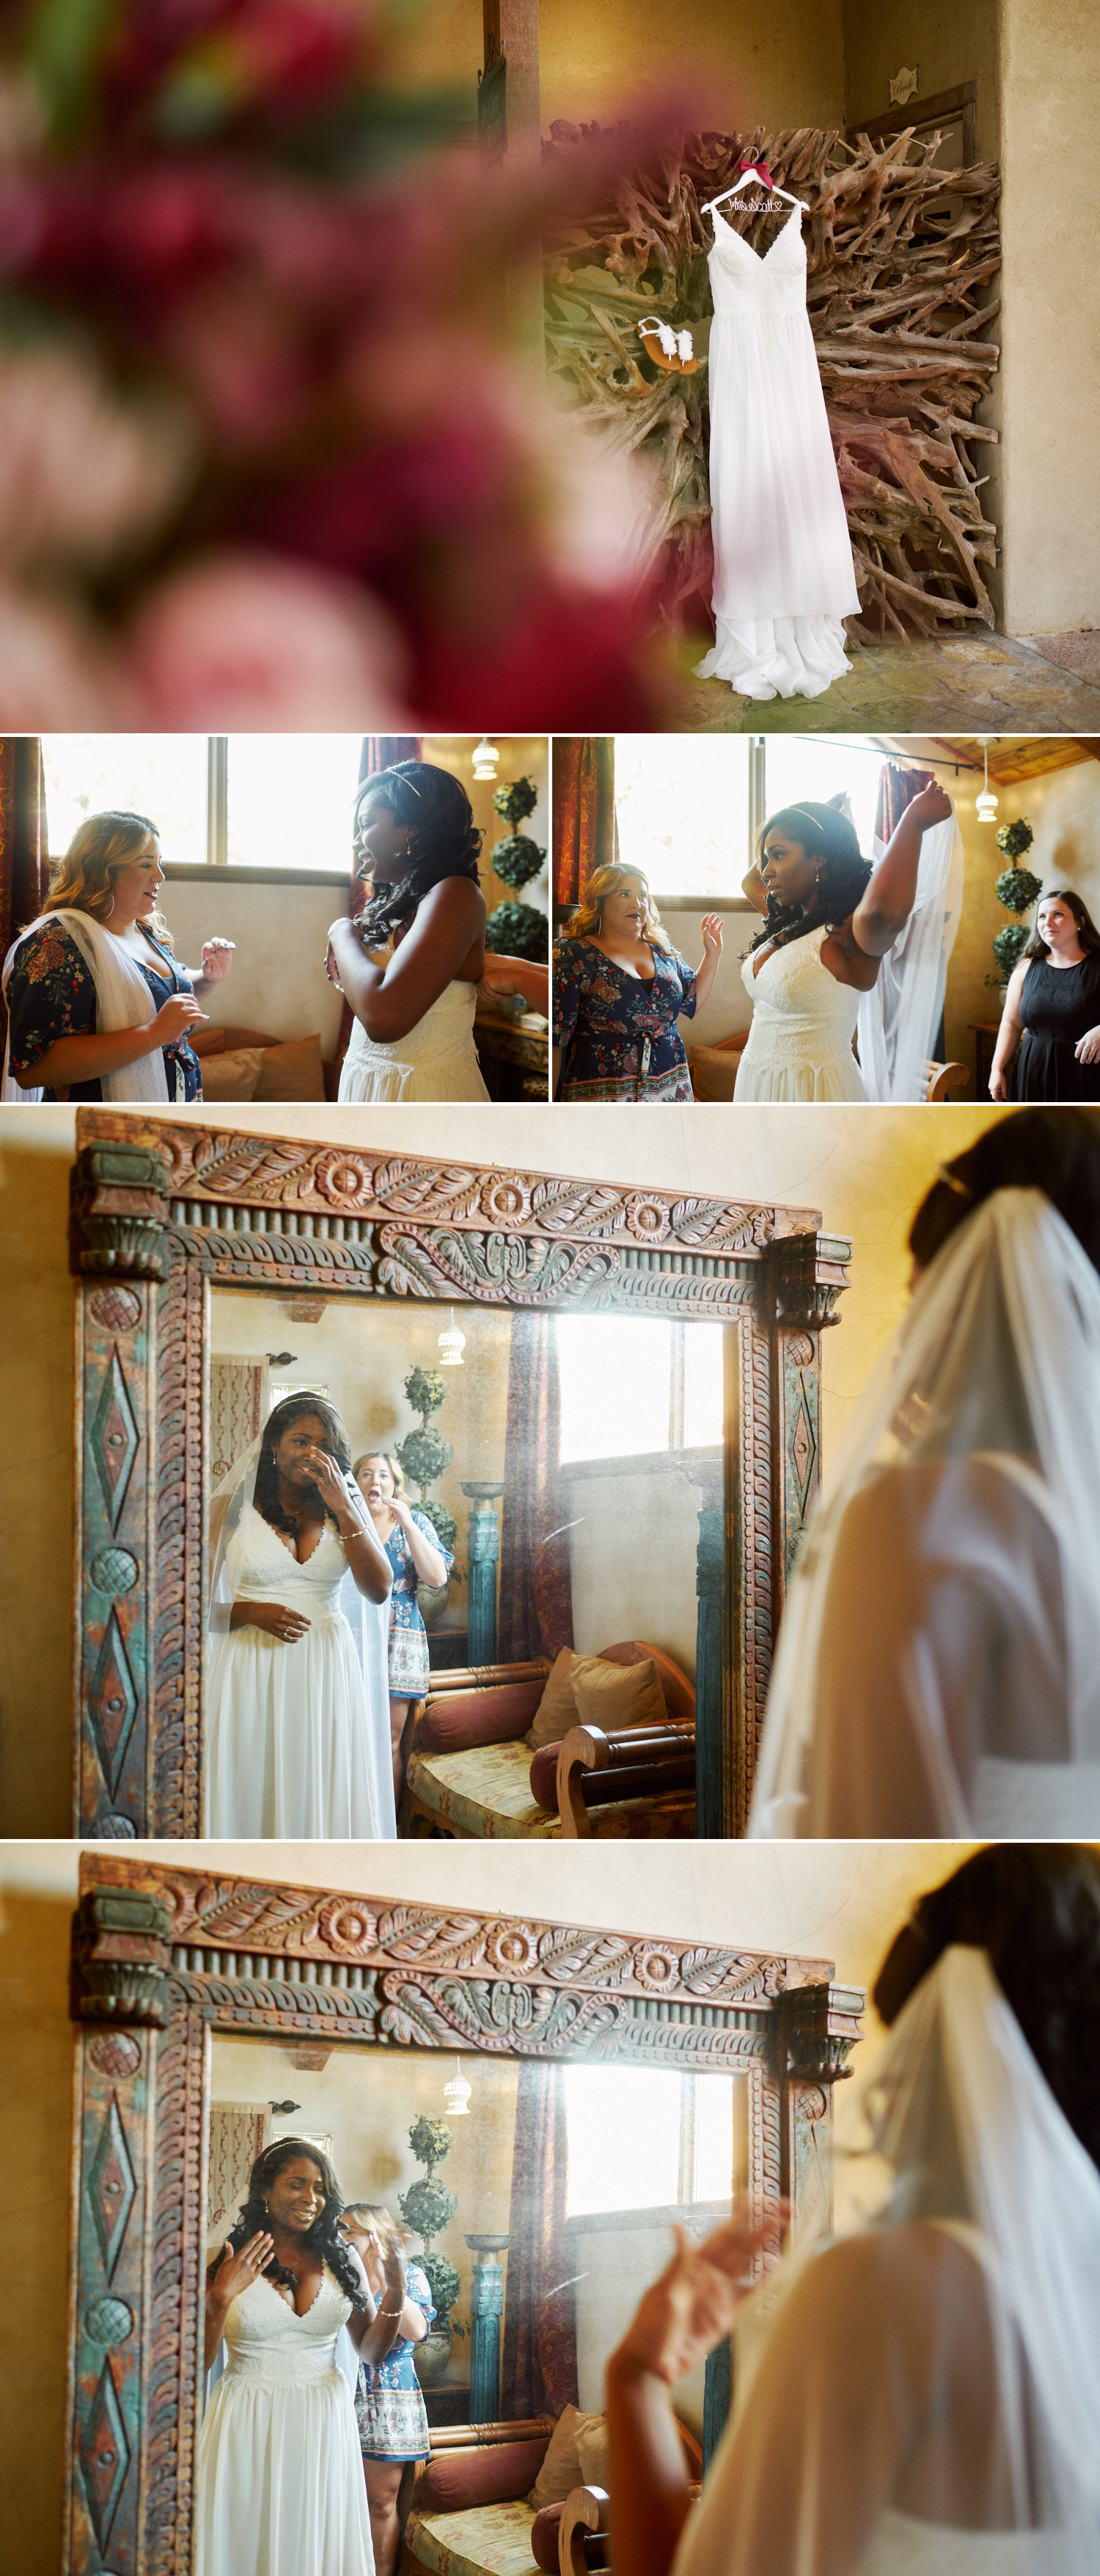 Jessica's bridal details and getting ready part of their Chapel Dulcinea wedding. Photographed by Austin wedding photojournalist Mercedes Morgan Photography.